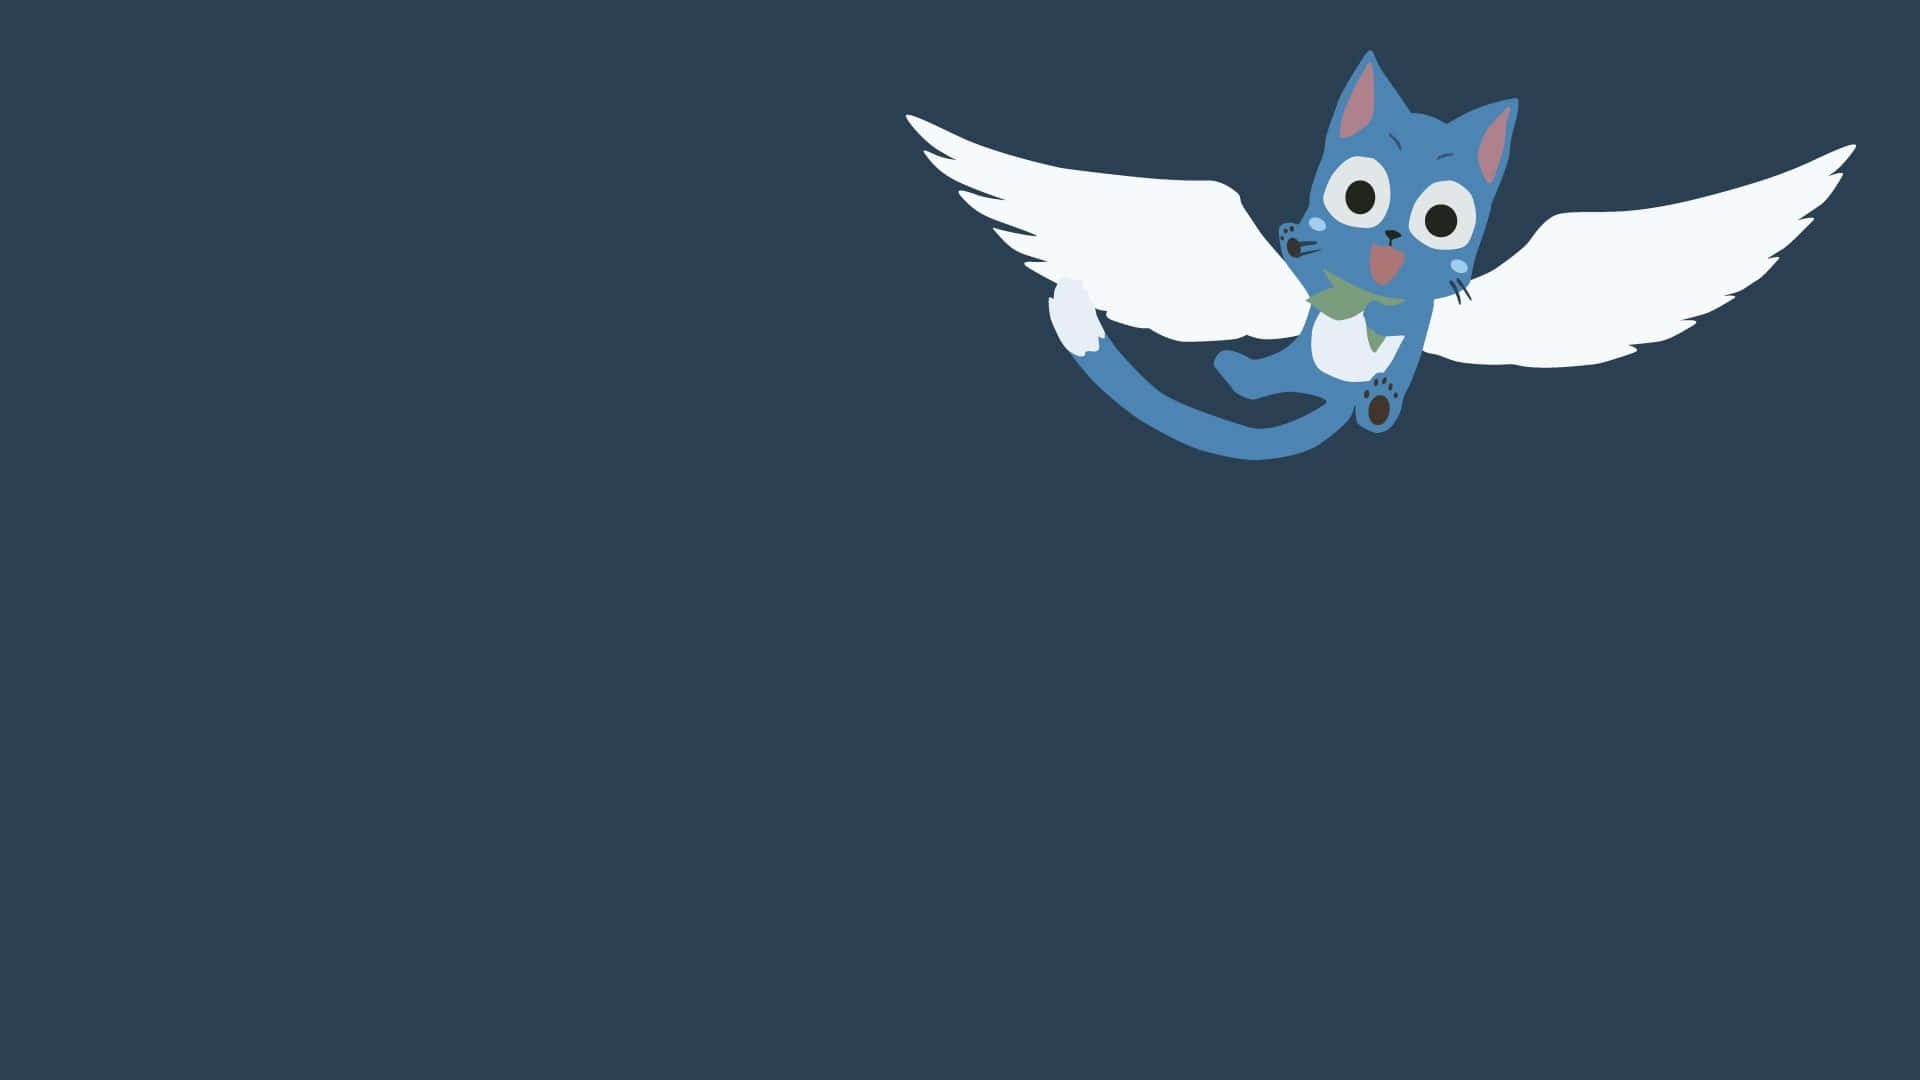 Happy, the lovable blue cat from Fairy Tail, takes flight! Wallpaper